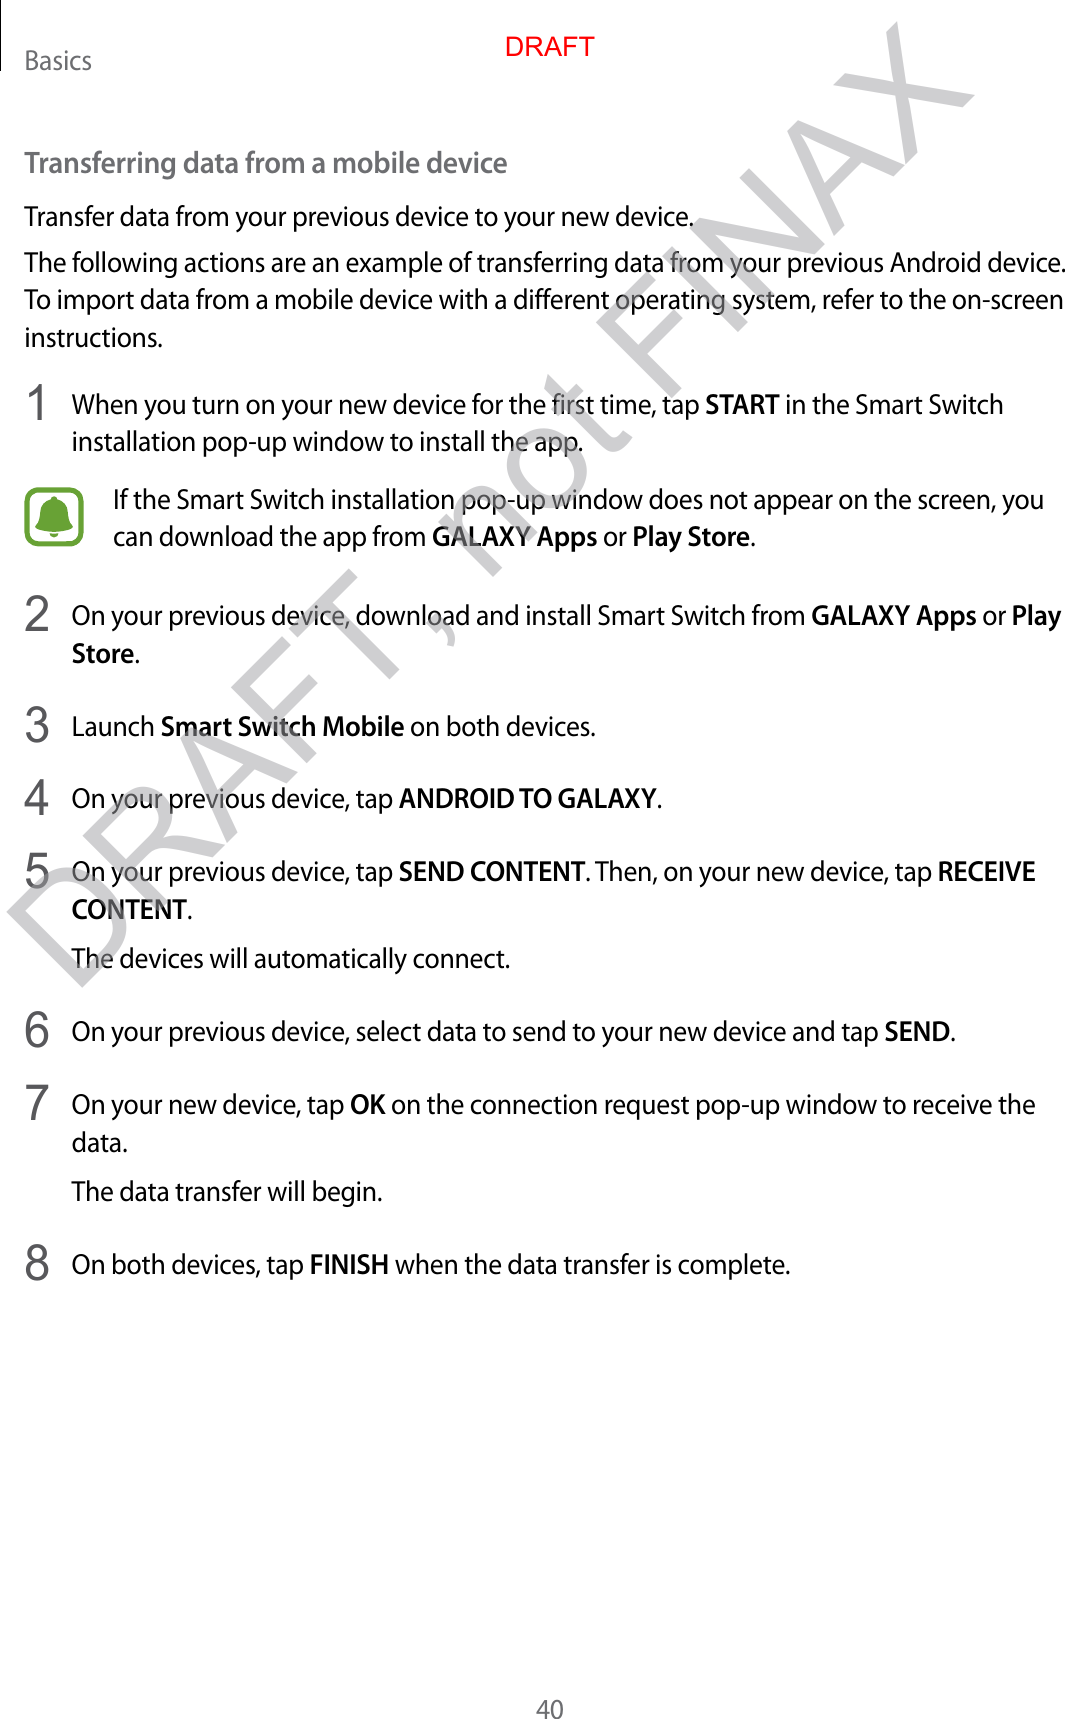 Basics40Transferring data from a mobile deviceTransfer data from your previous device to your new device.The following actions are an example of transferring data from your previous Android device. To import data from a mobile device with a different operating system, refer to the on-screen instructions.1  When you turn on your new device for the first time, tap START in the Smart Switch installation pop-up window to install the app.If the Smart Switch installation pop-up window does not appear on the screen, you can download the app from GALAXY Apps or Play Store.2  On your previous device, download and install Smart Switch from GALAXY Apps or Play Store.3  Launch Smart Switch Mobile on both devices.4  On your previous device, tap ANDROID TO GALAXY.5  On your previous device, tap SEND CONTENT. Then, on your new device, tap RECEIVE CONTENT.The devices will automatically connect.6  On your previous device, select data to send to your new device and tap SEND.7  On your new device, tap OK on the connection request pop-up window to receive the data.The data transfer will begin.8  On both devices, tap FINISH when the data transfer is complete.DRAFTDRAFT, not FINAX